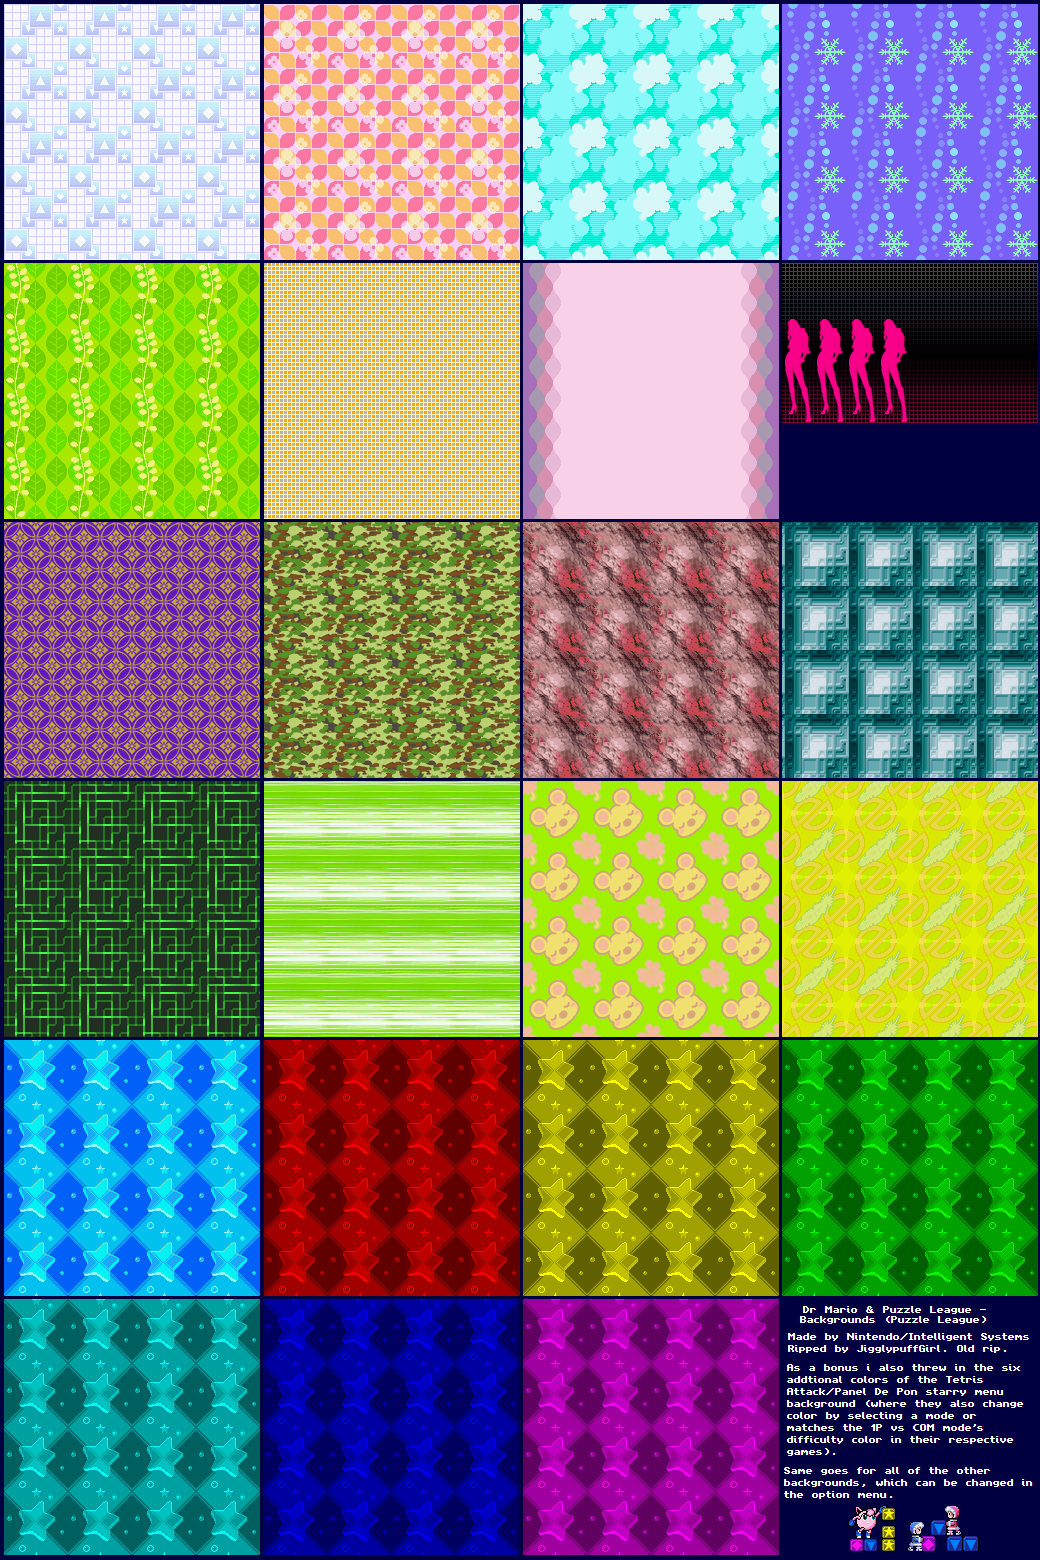 Dr. Mario and Puzzle League - Backgrounds